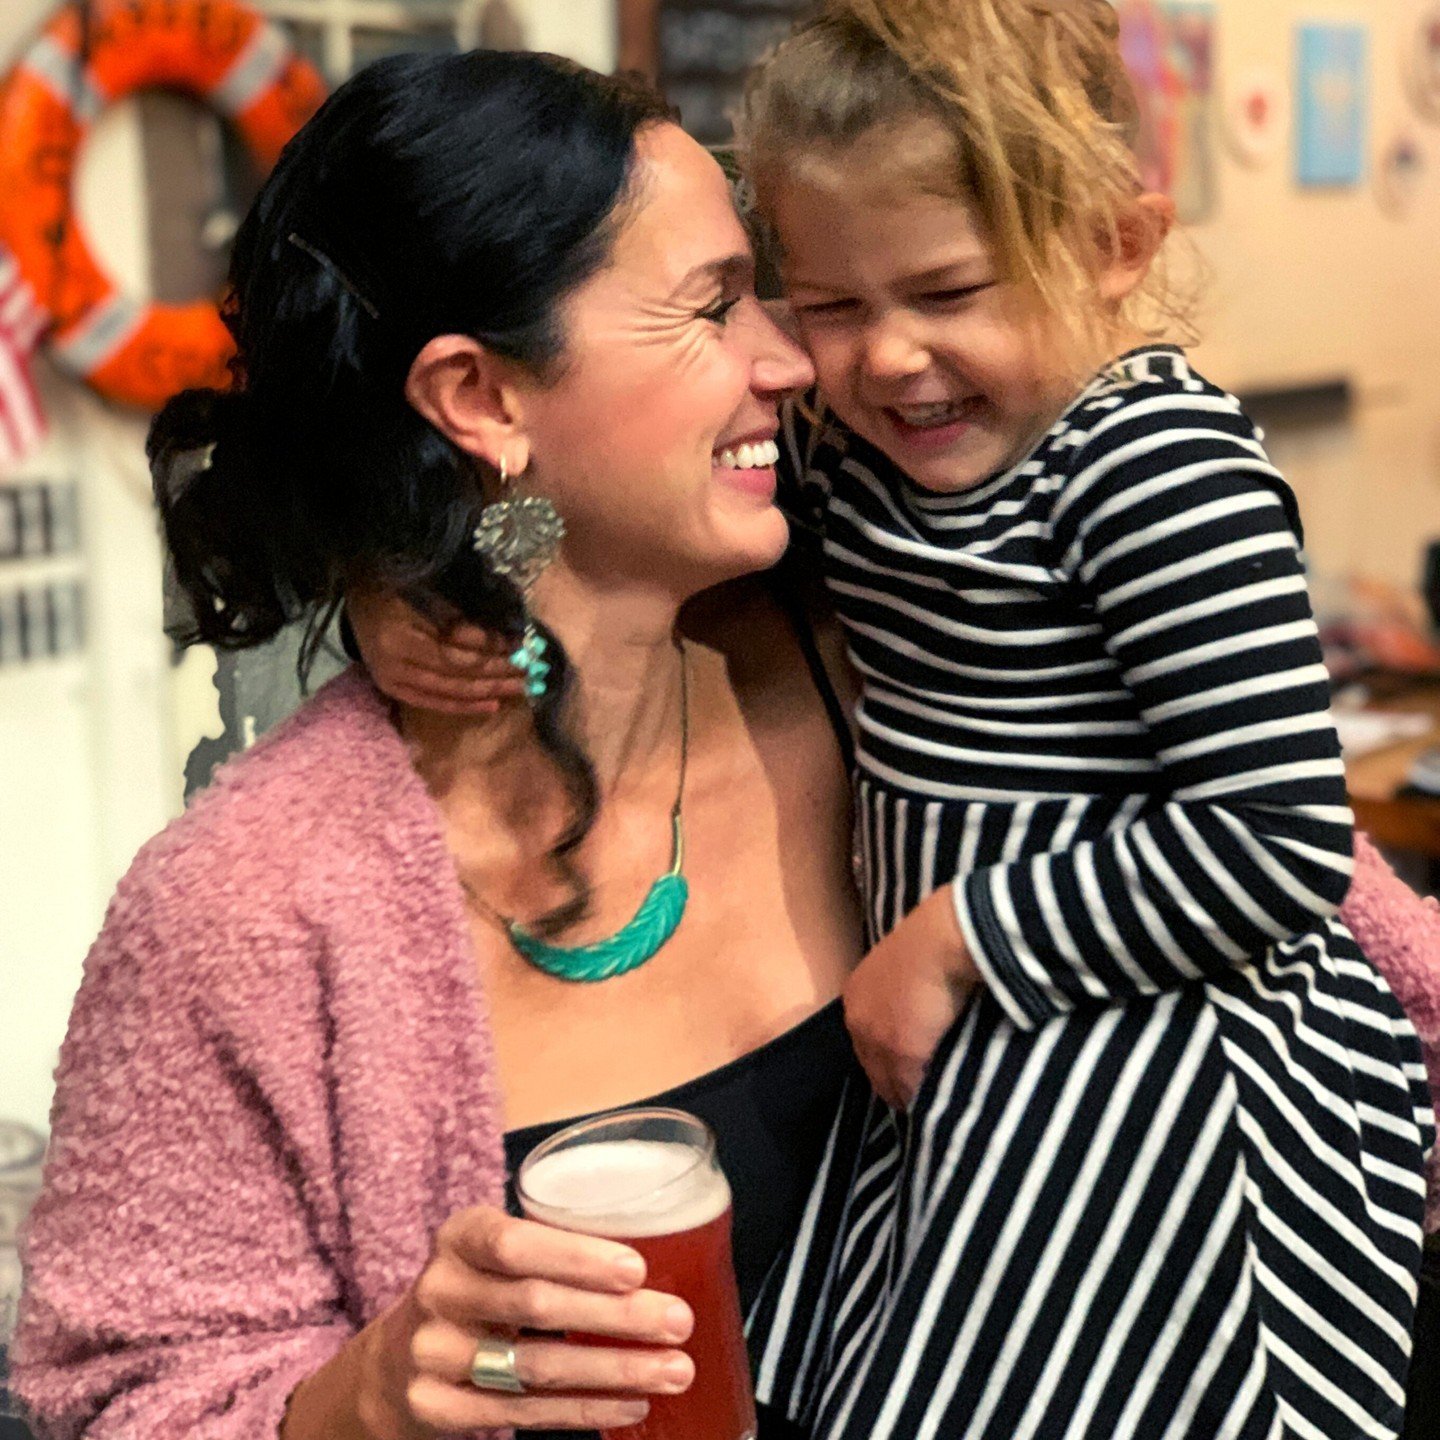 What&rsquo;s a Beer Mom Brunch?🍺💐 It&rsquo;s a laid-back, unfussy, wear whatever you want Mother&rsquo;s Day event! Sunday May 12 from 12-4pm in our outdoor space, Love City Gardens☀️🌿 Your ticket includes a delicious brunch buffet, your first bee